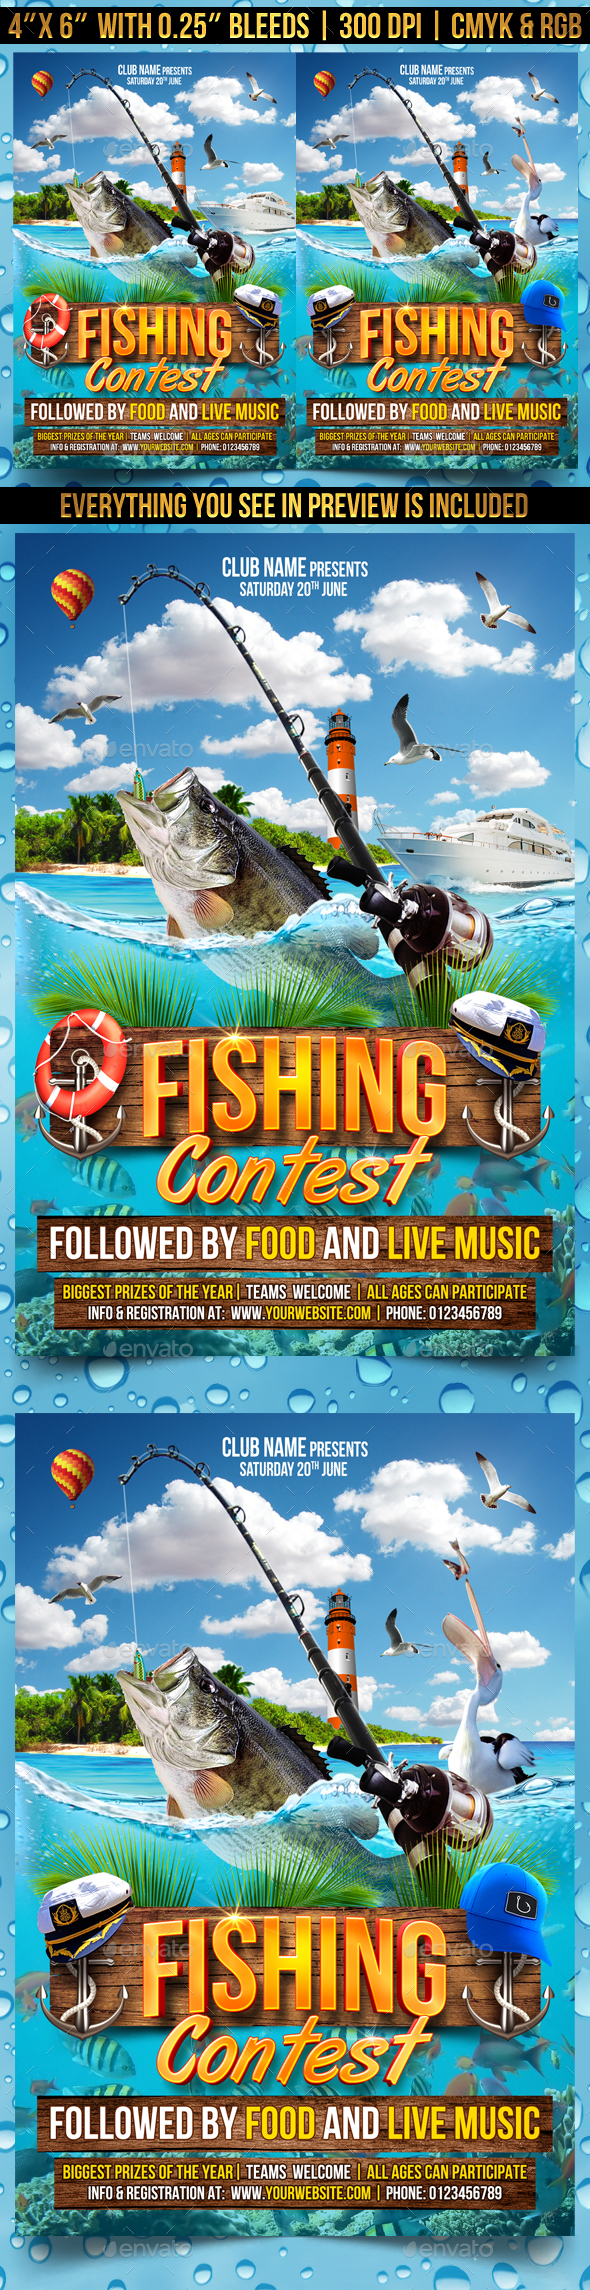 Fishing Contest Flyer Template For Fishing Tournament Flyer Template